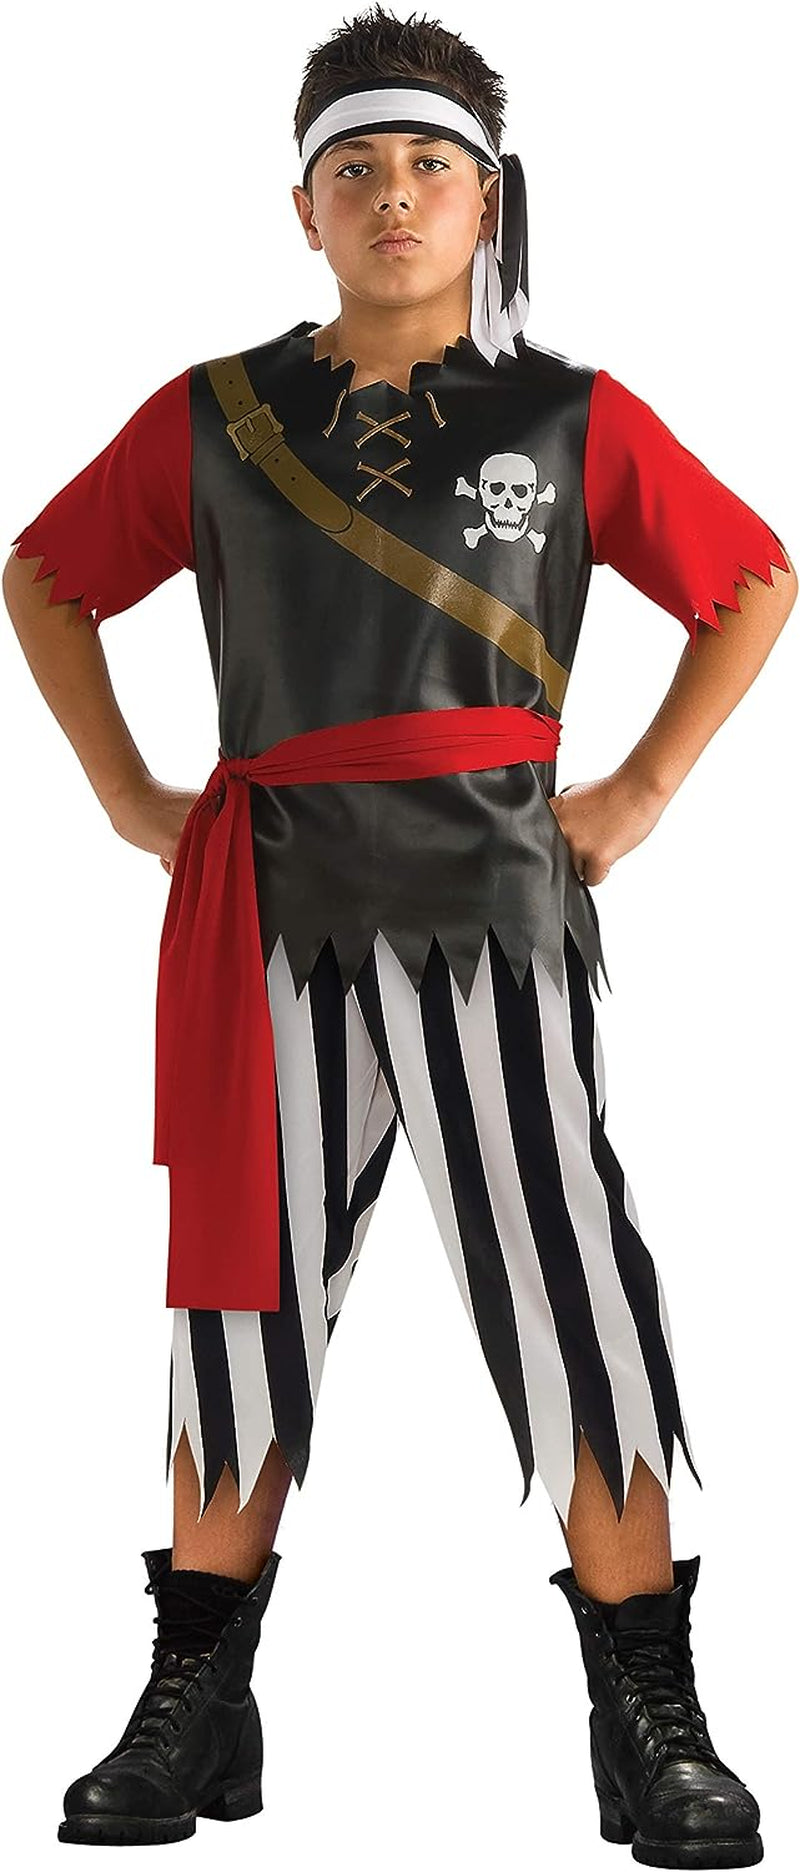 Rubies Halloween Concepts Children'S Costumes Pirate King - Large  Rubies   